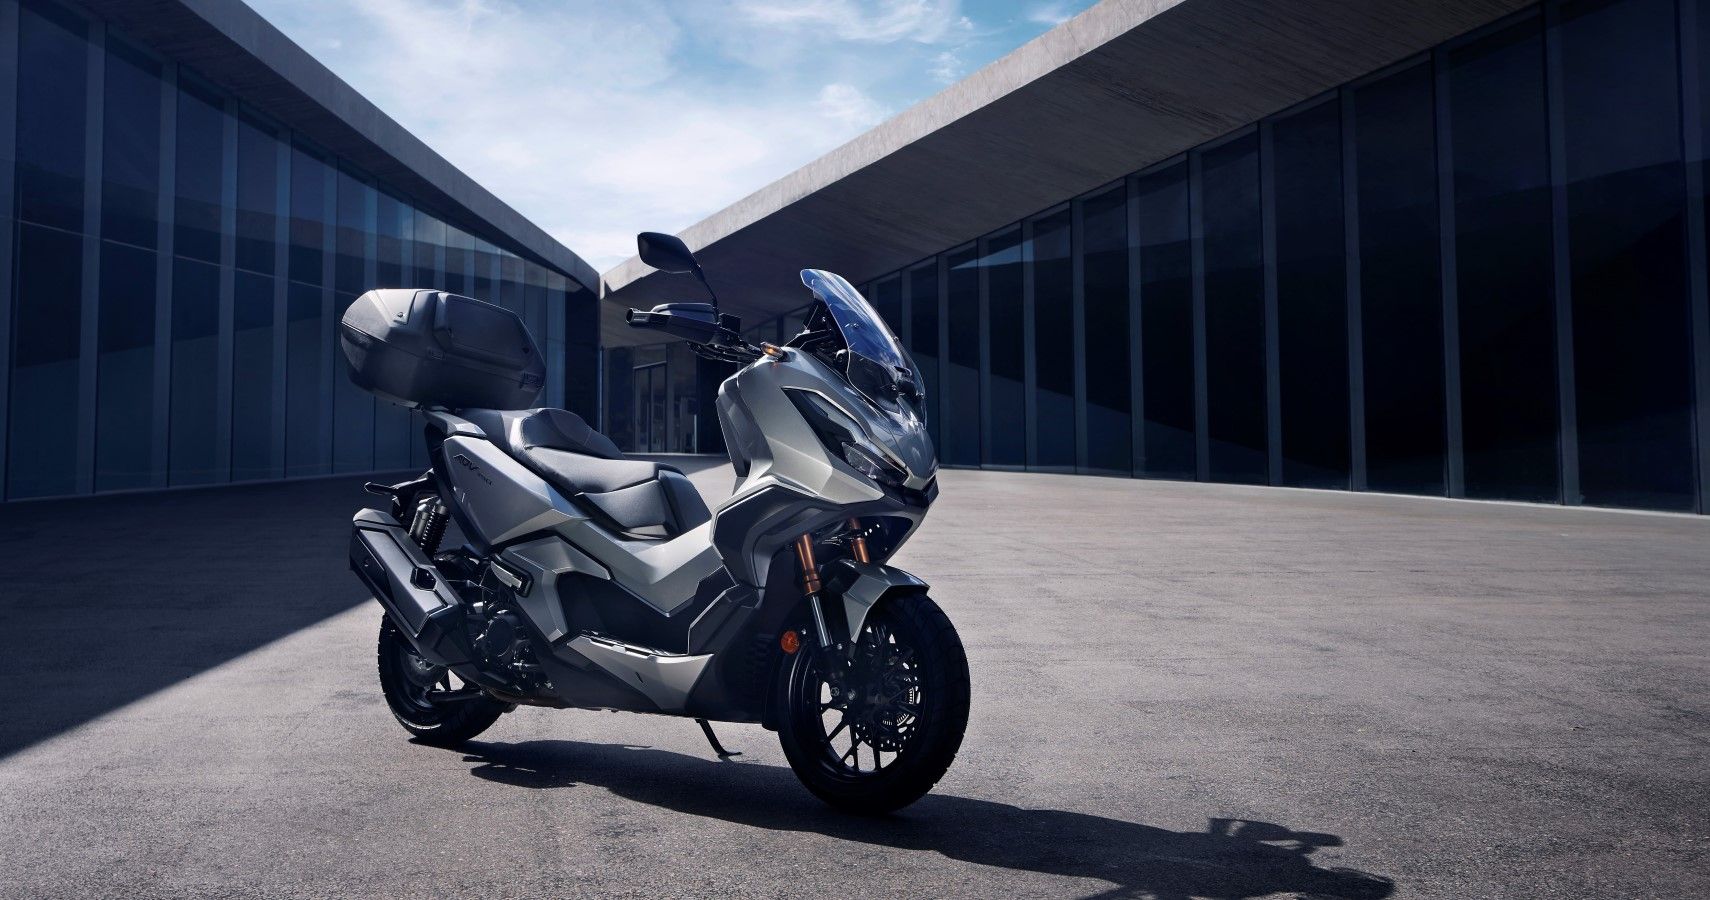 2022 Honda ADV350 will be Europe-only